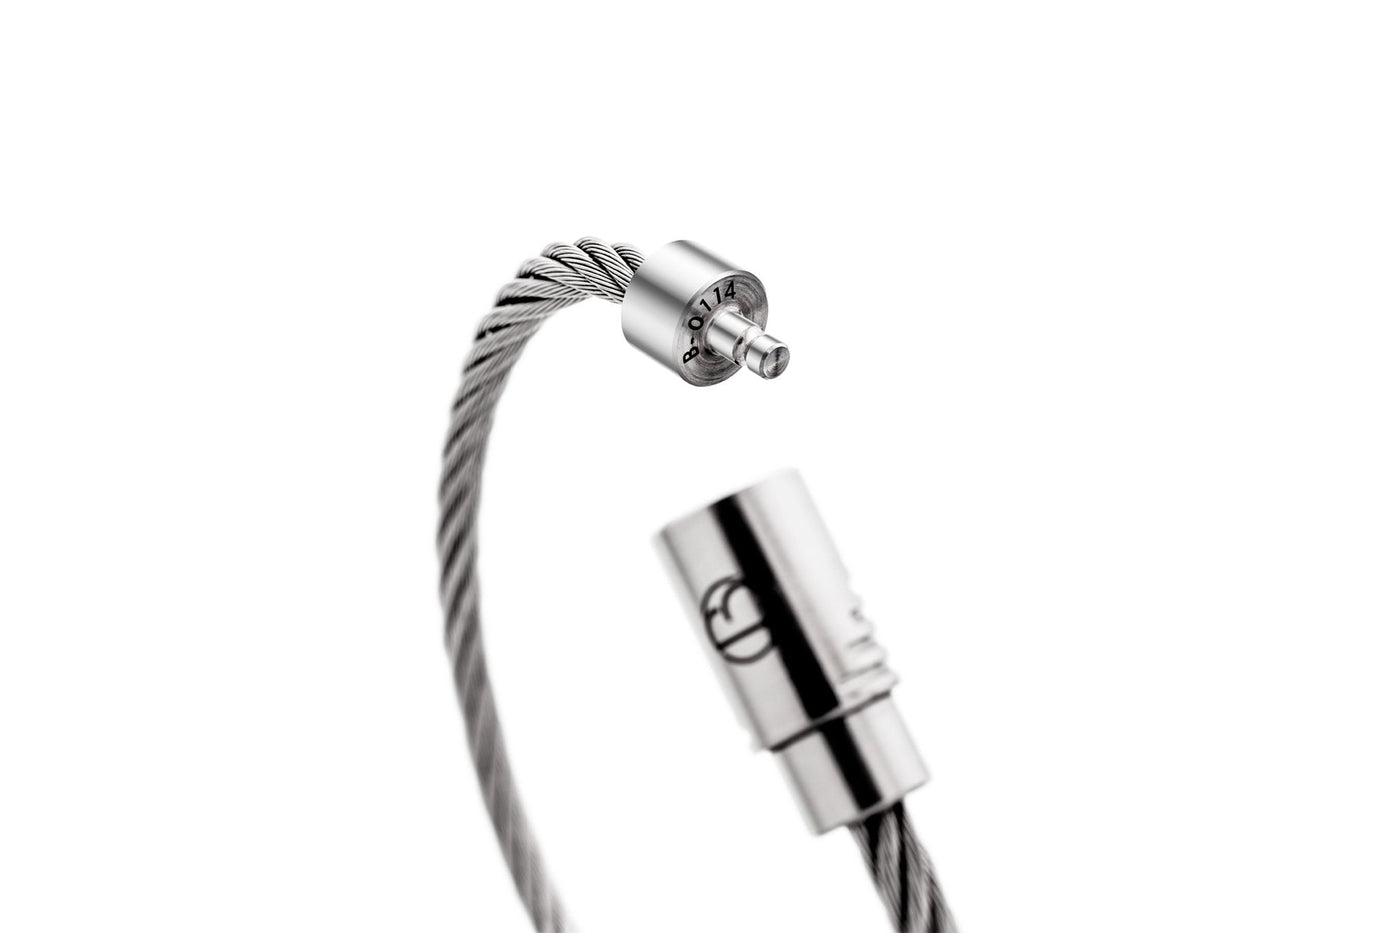 Fully Loaded CABLE Stainless Steel Bracelet V2 - Free Text Engraving*